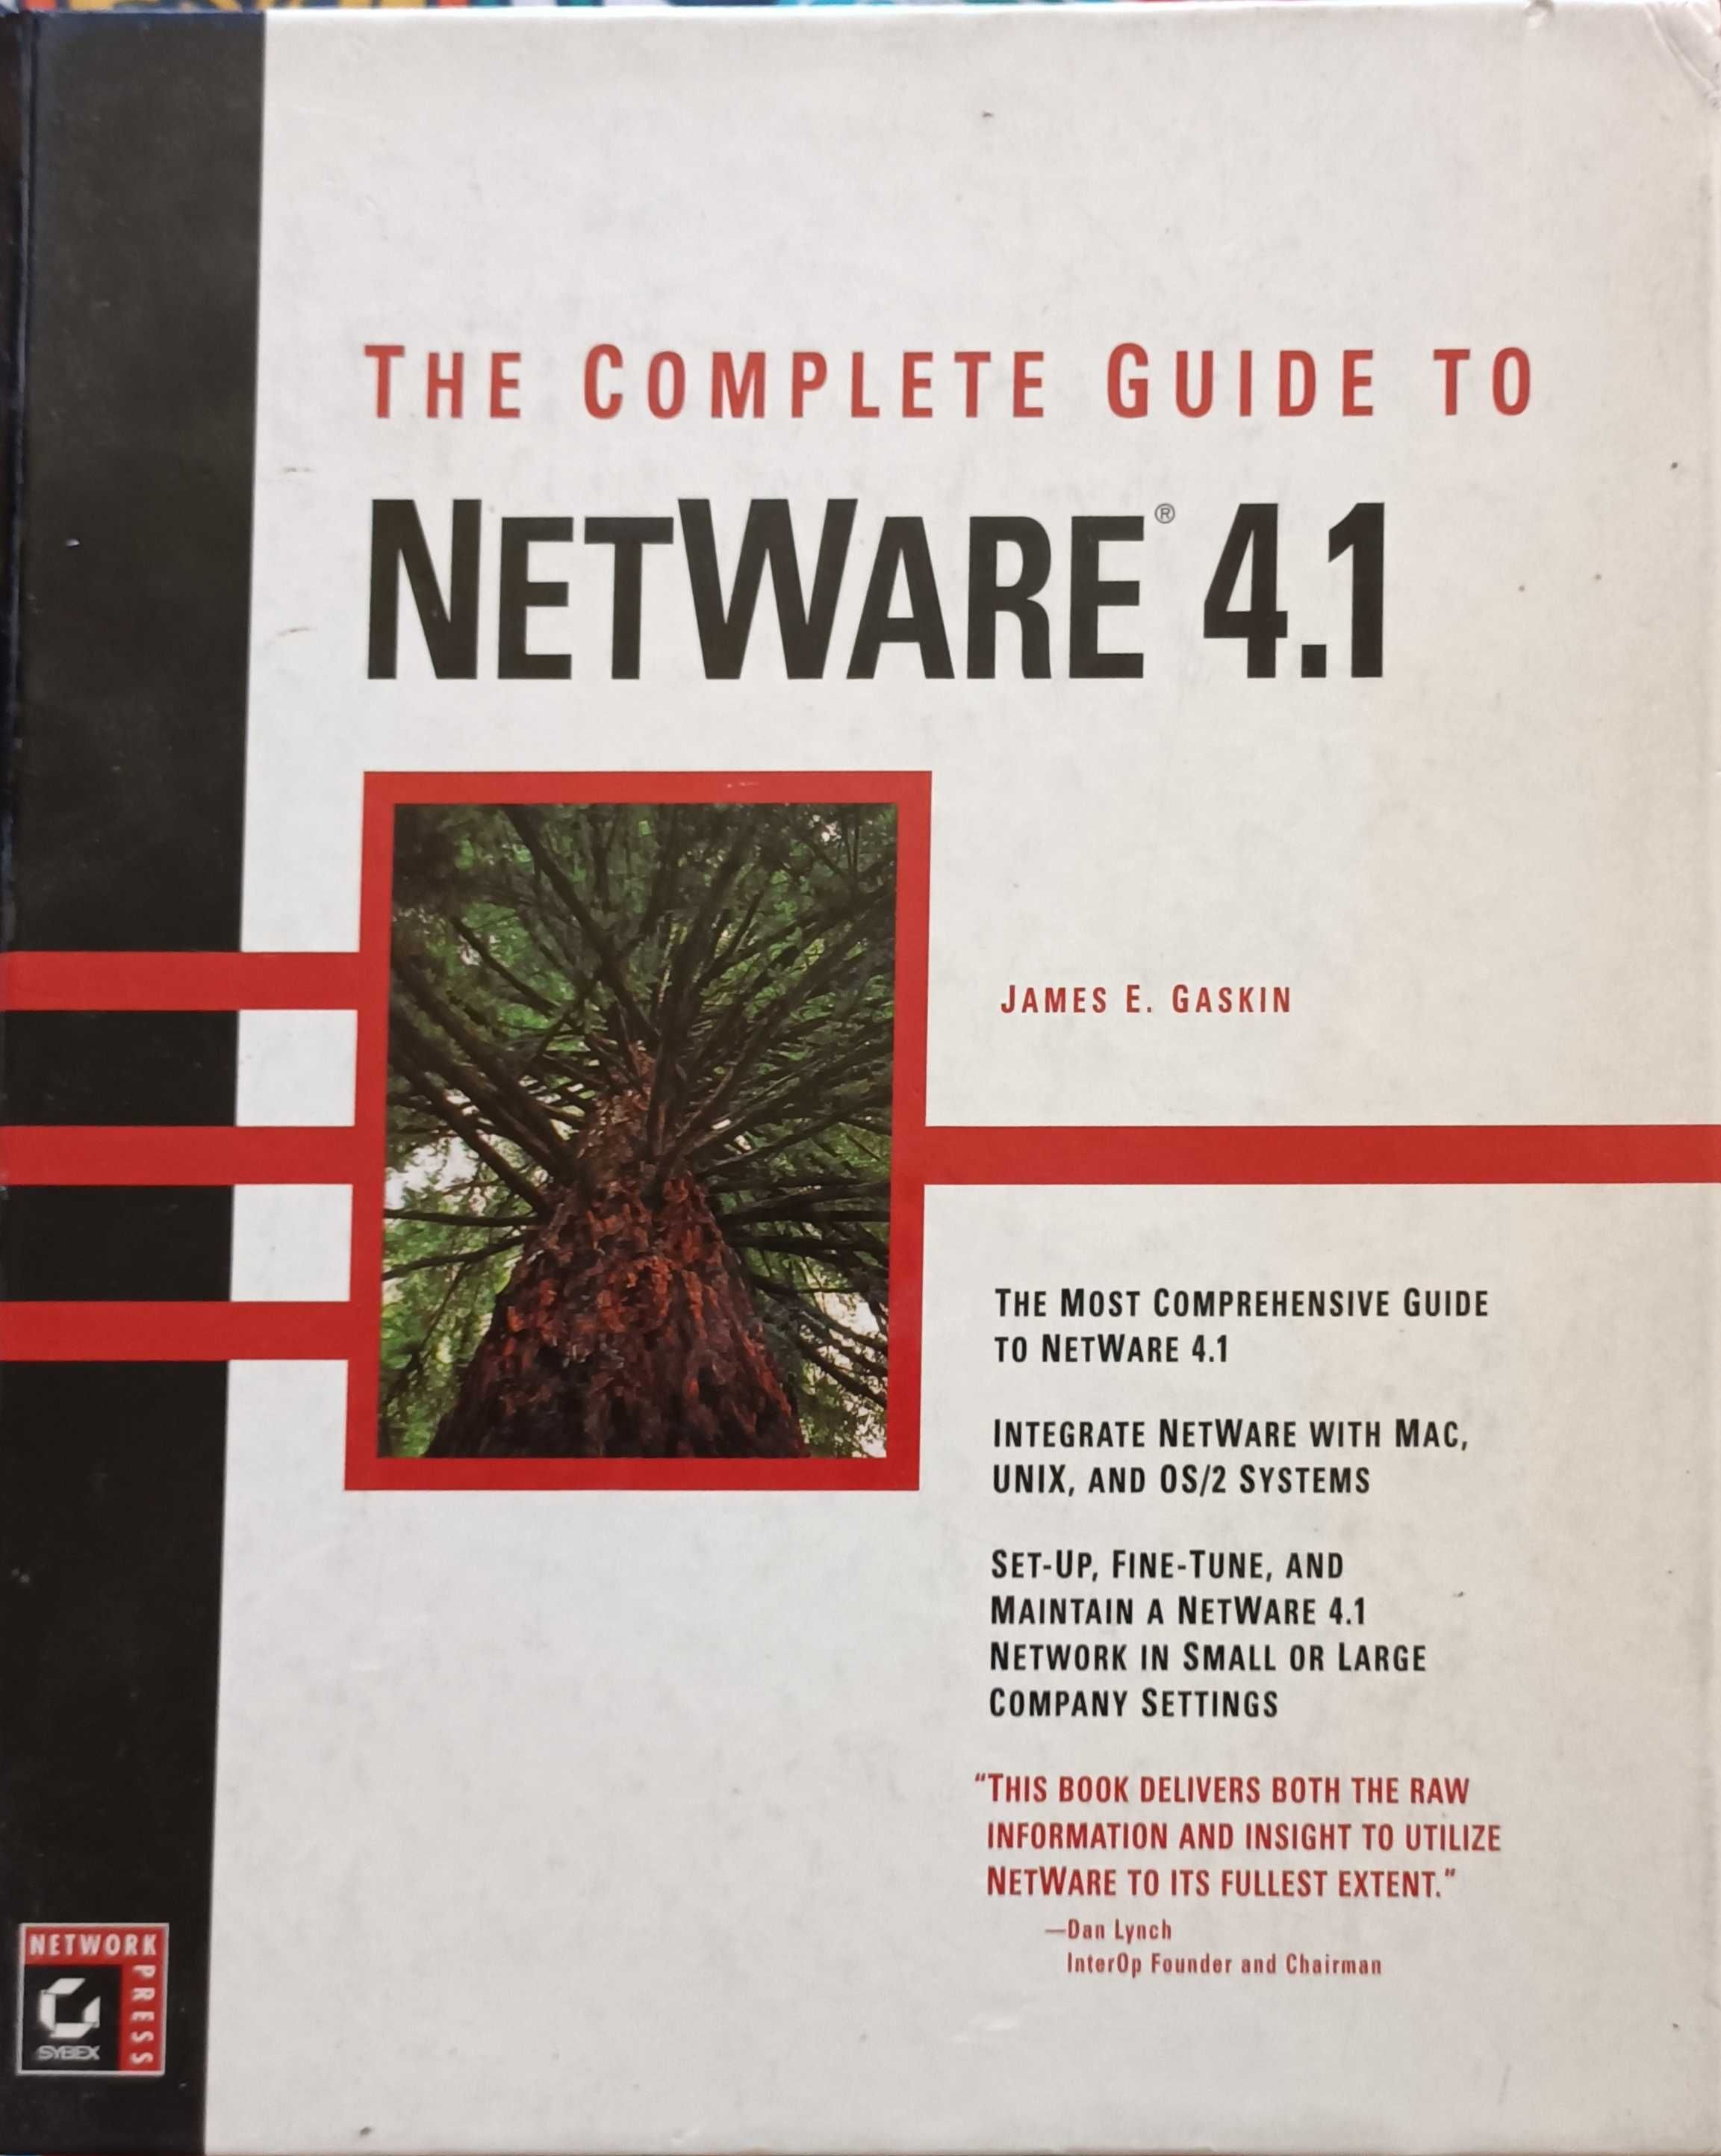 The complete guide to NetWare 4.1